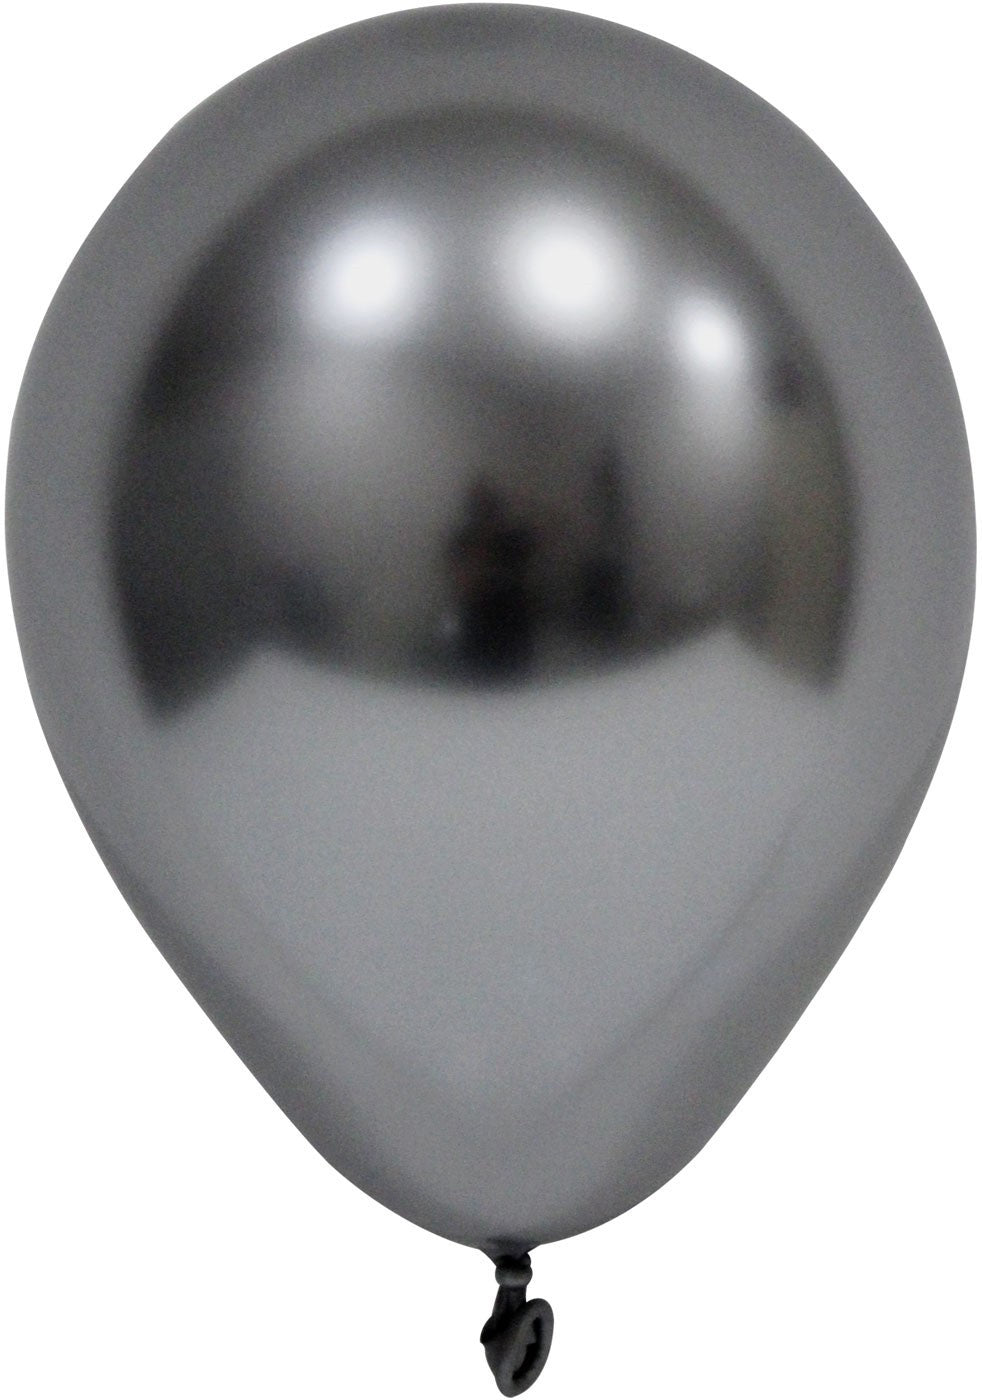 View Space Grey Chrome Round Shape Latex Balloon 6 inch Pk 50 information